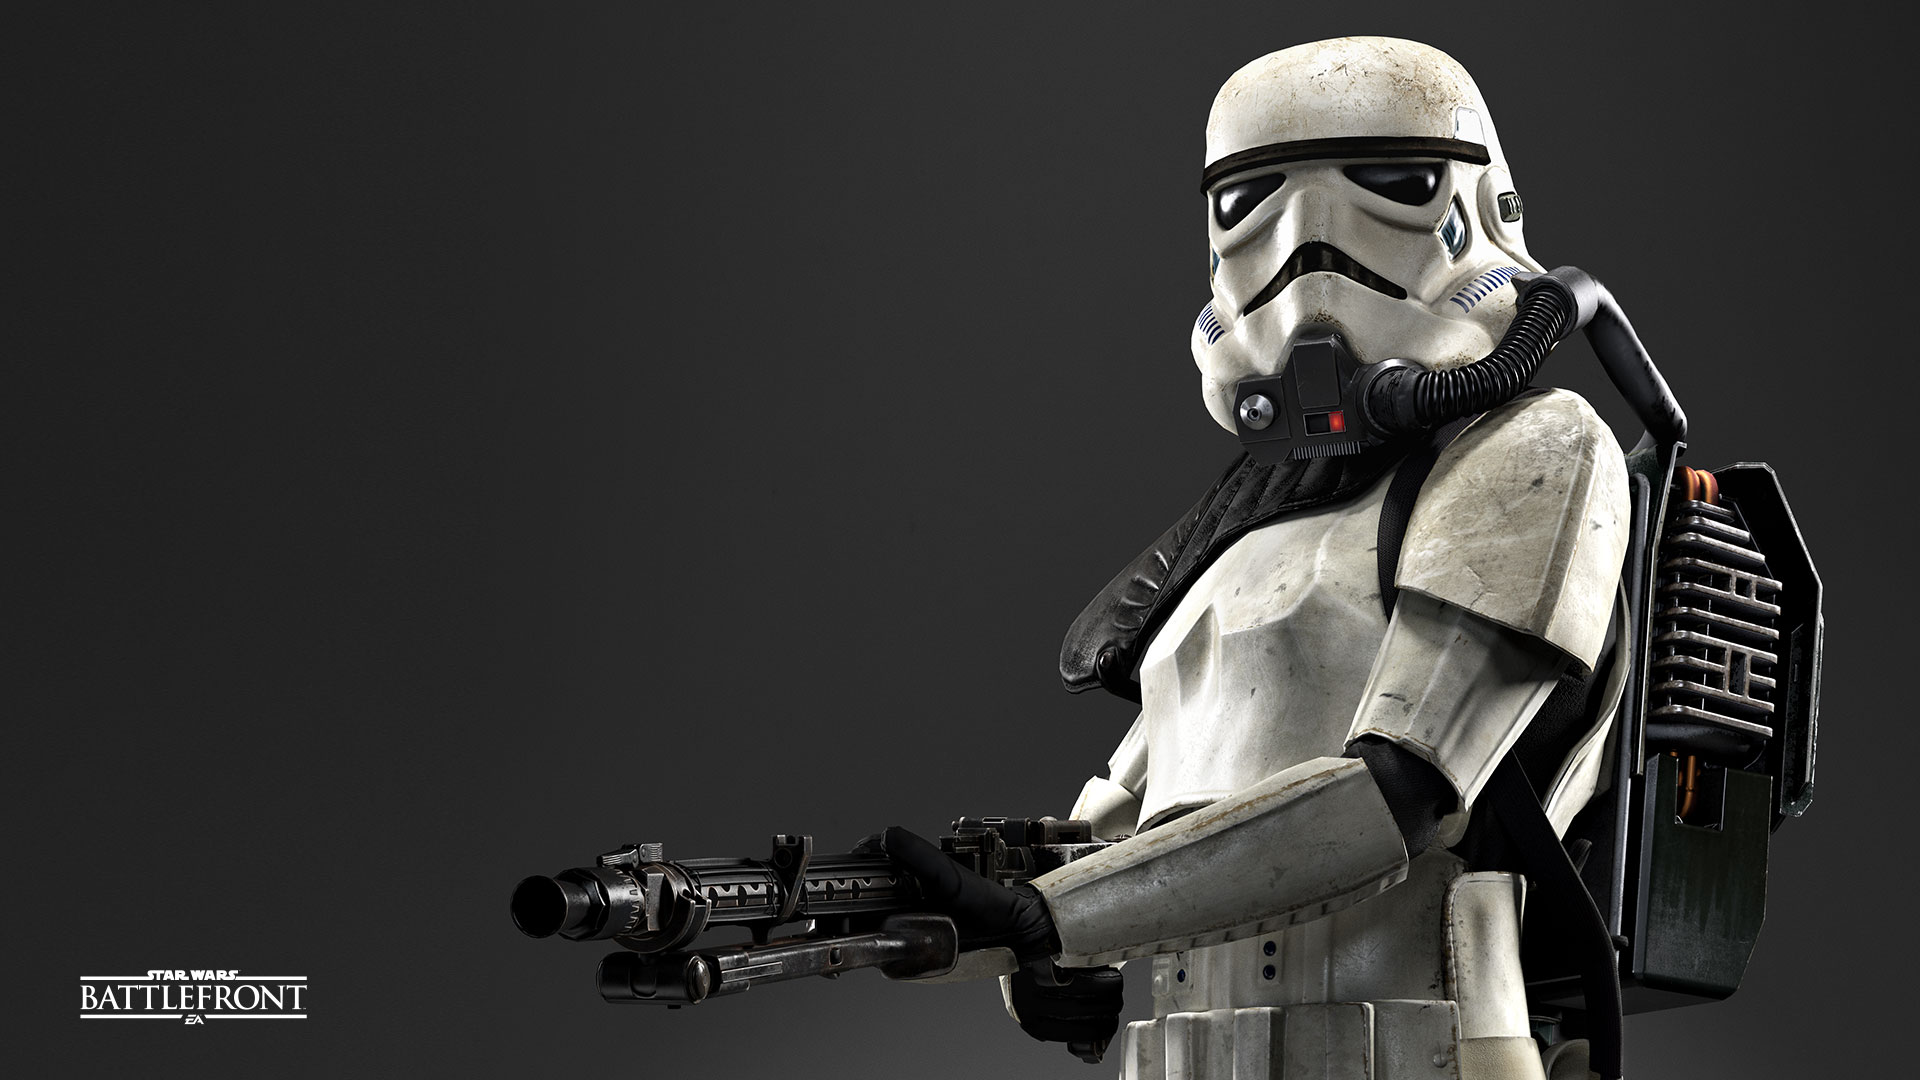 battlefront wallpaper,action figure,fictional character,figurine,toy